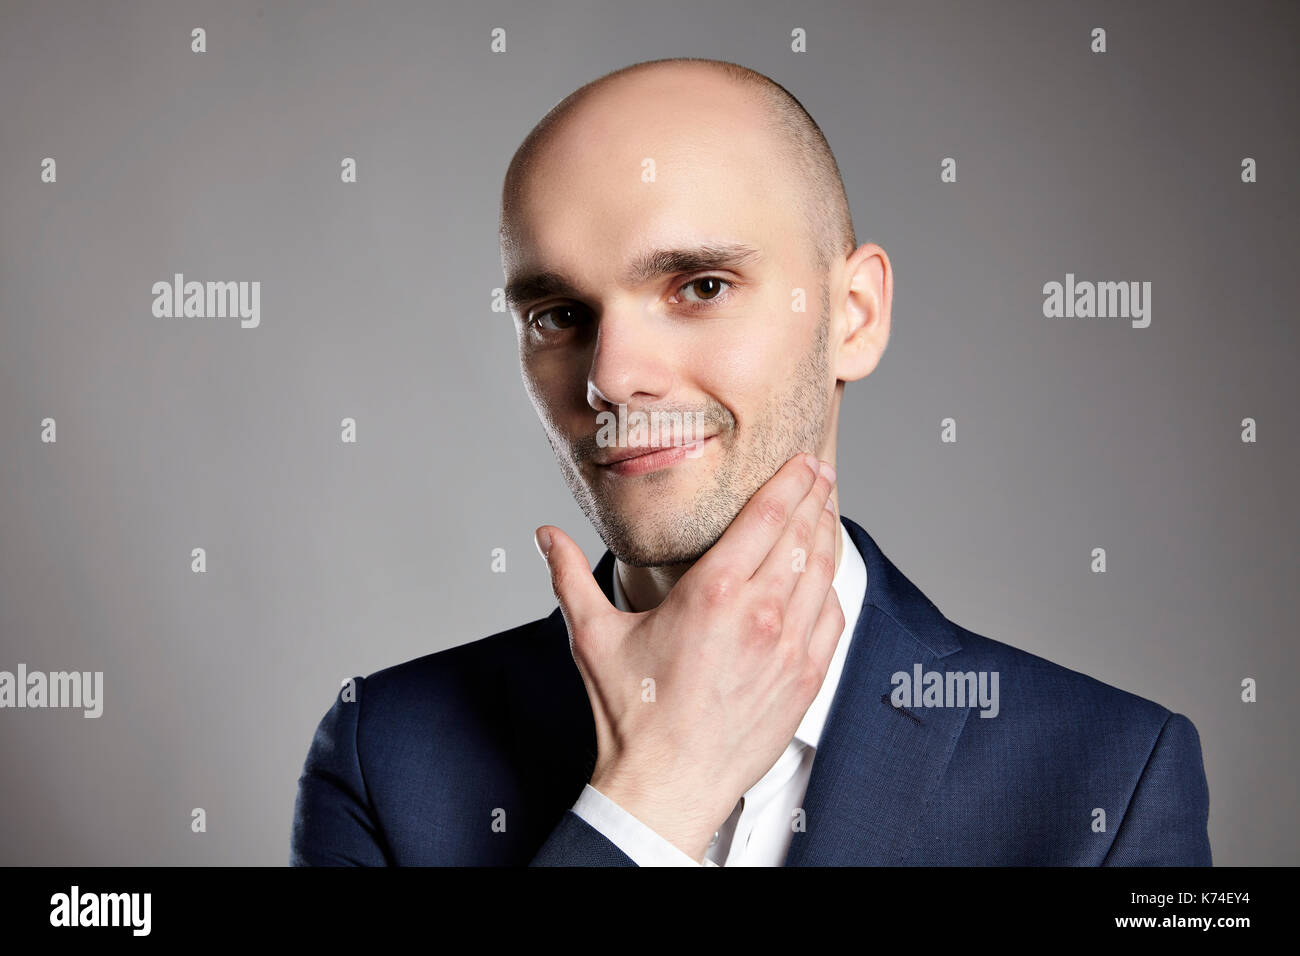 Portrait of a young man stroking his chin. Headshot on gray background. Stock Photo